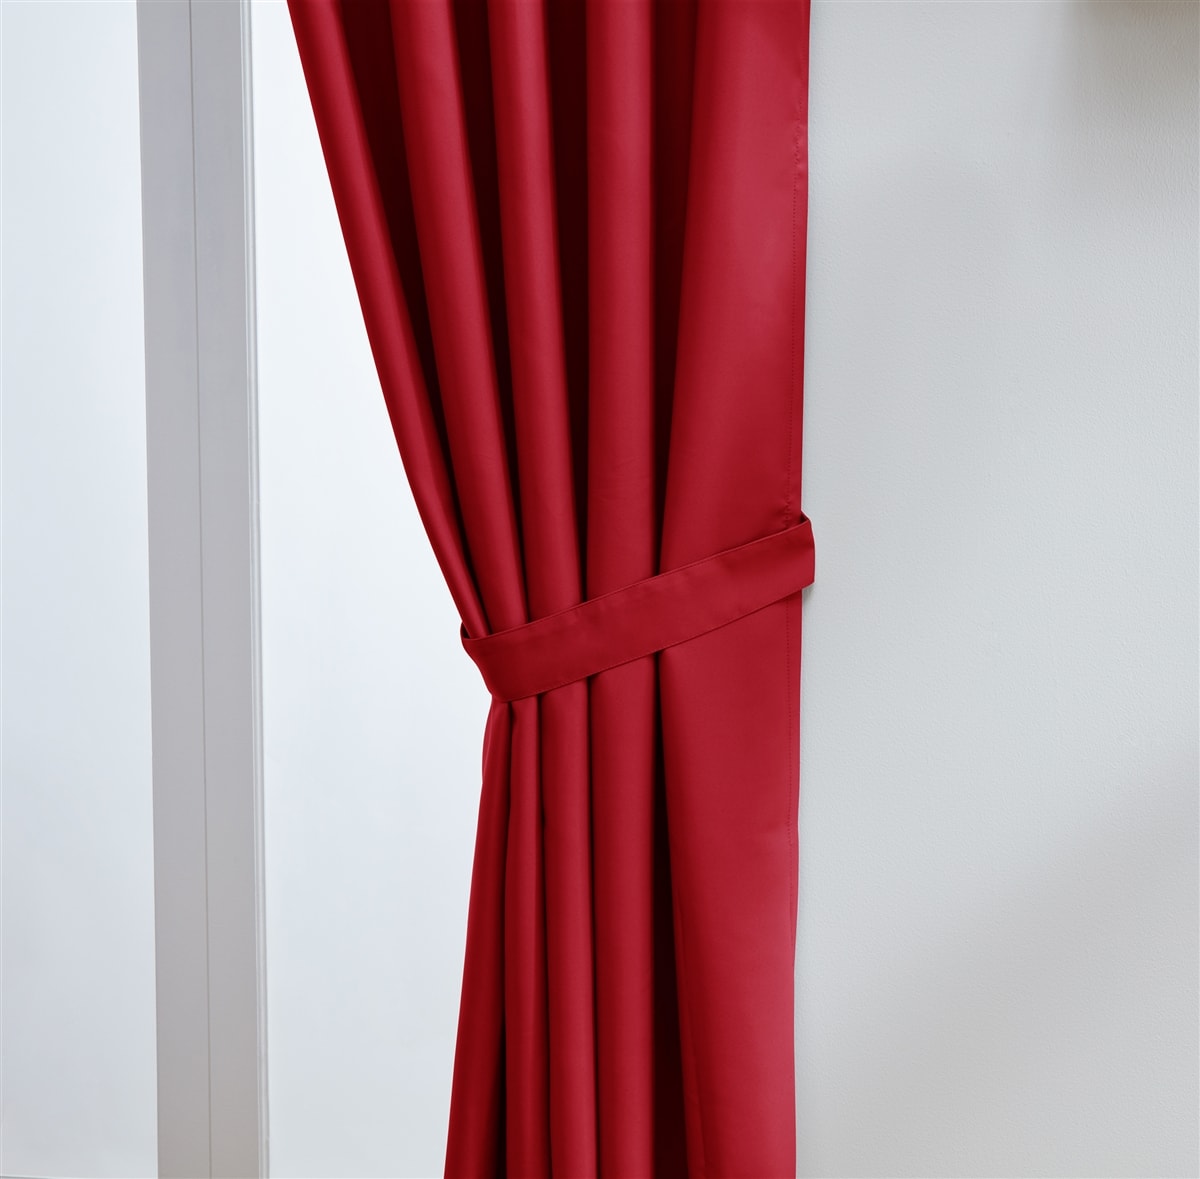 Thermal Blackout Ready Made Eyelet Curtains + Tie Backs (Red)